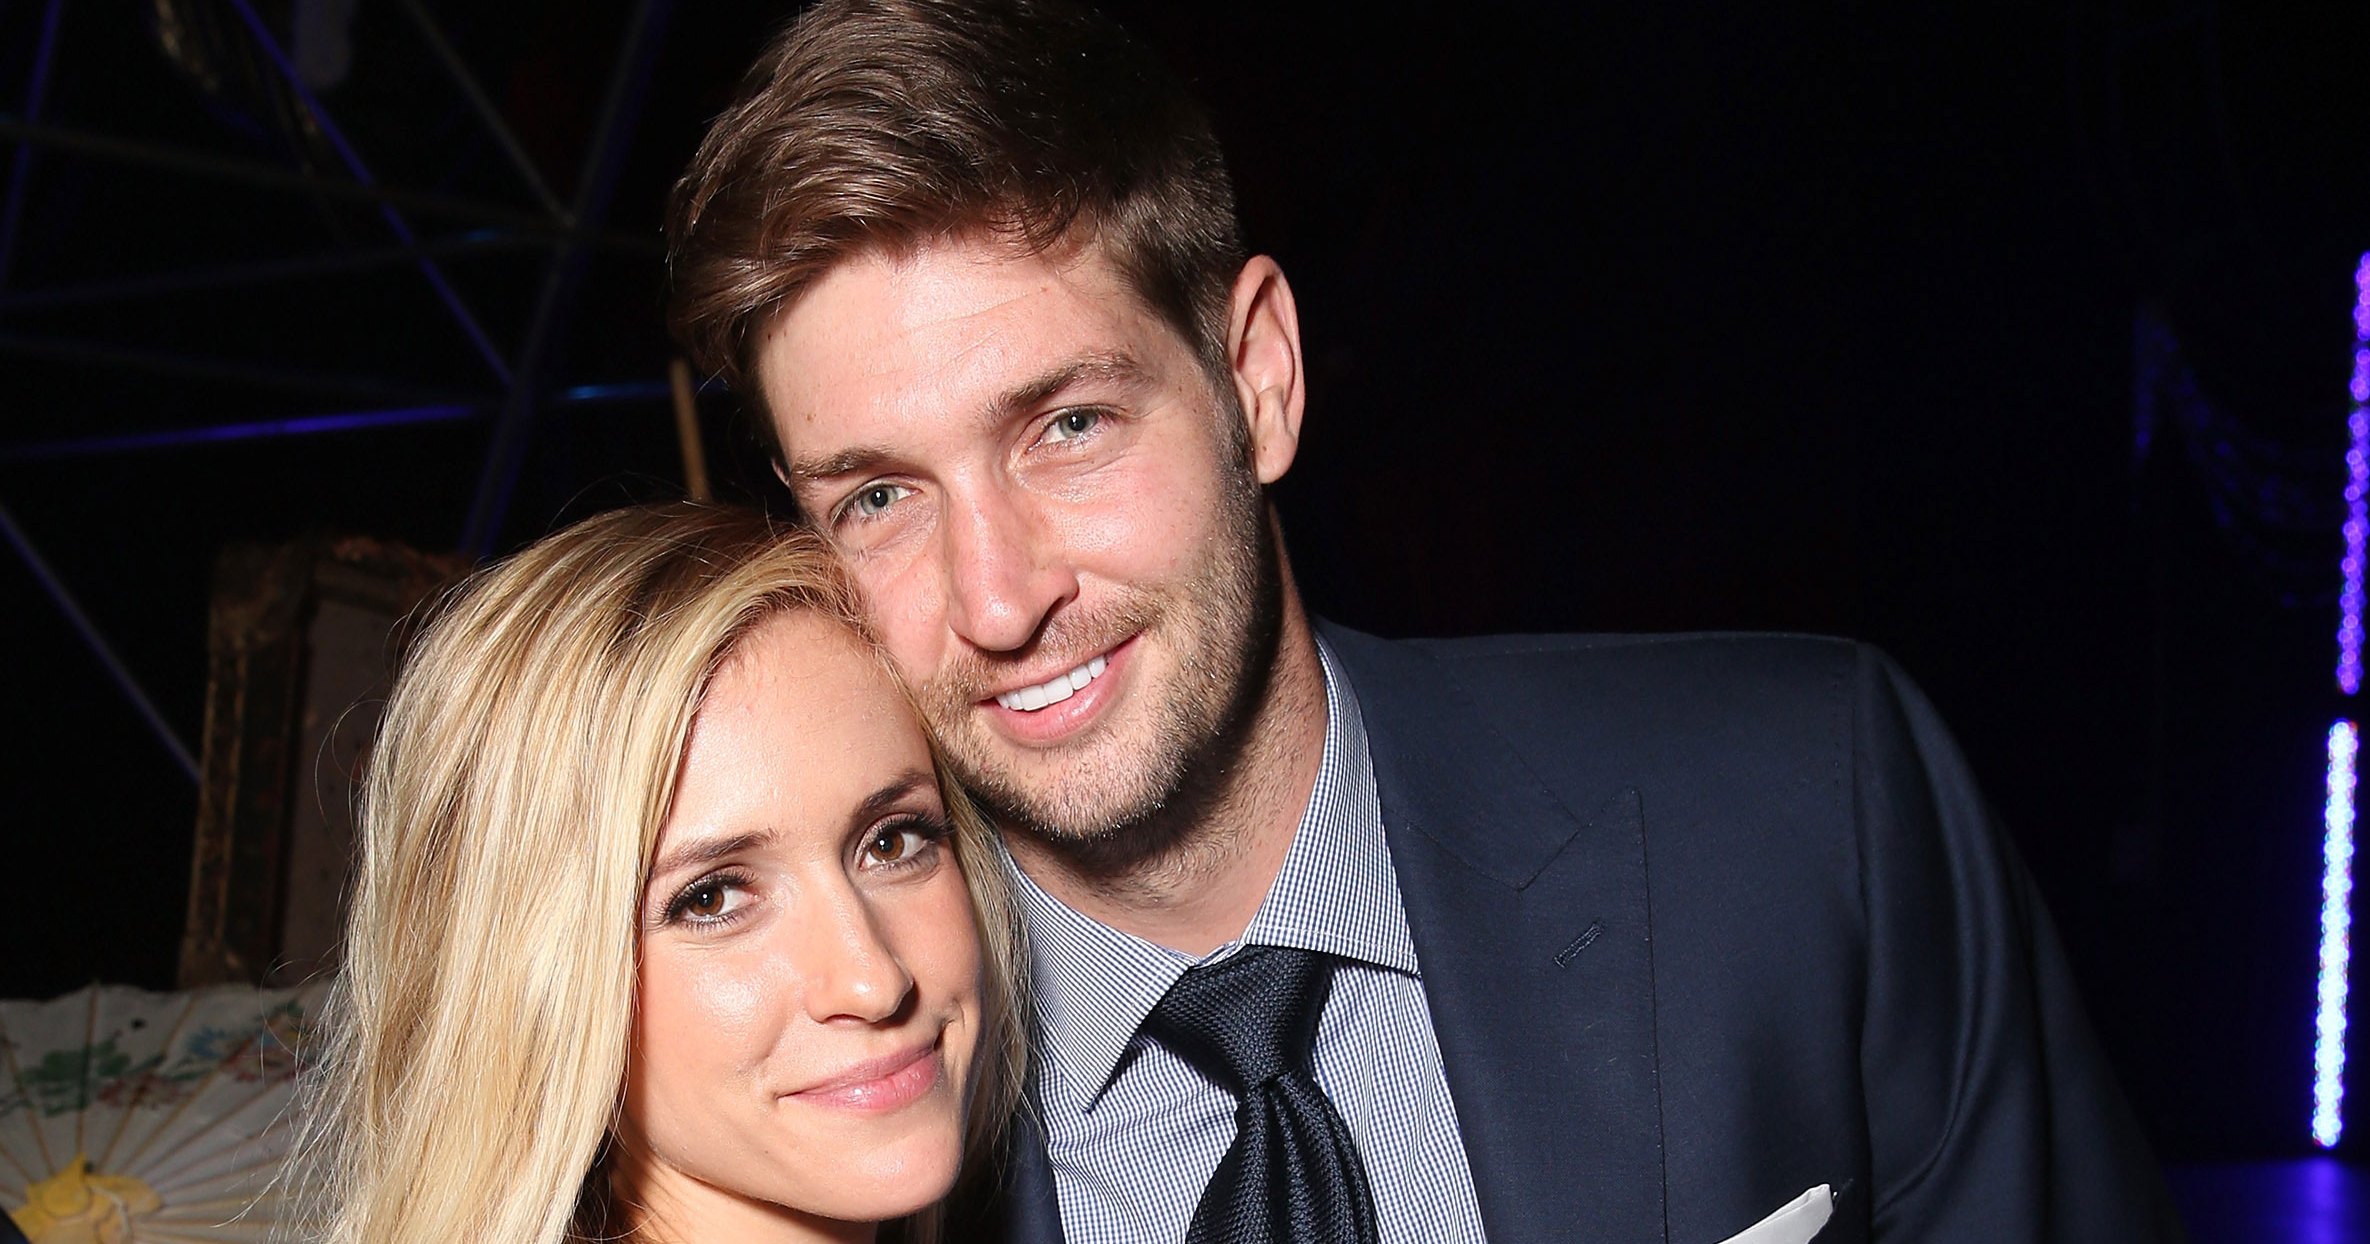 kristin cavallari and jay cutlers ups and downs through the years